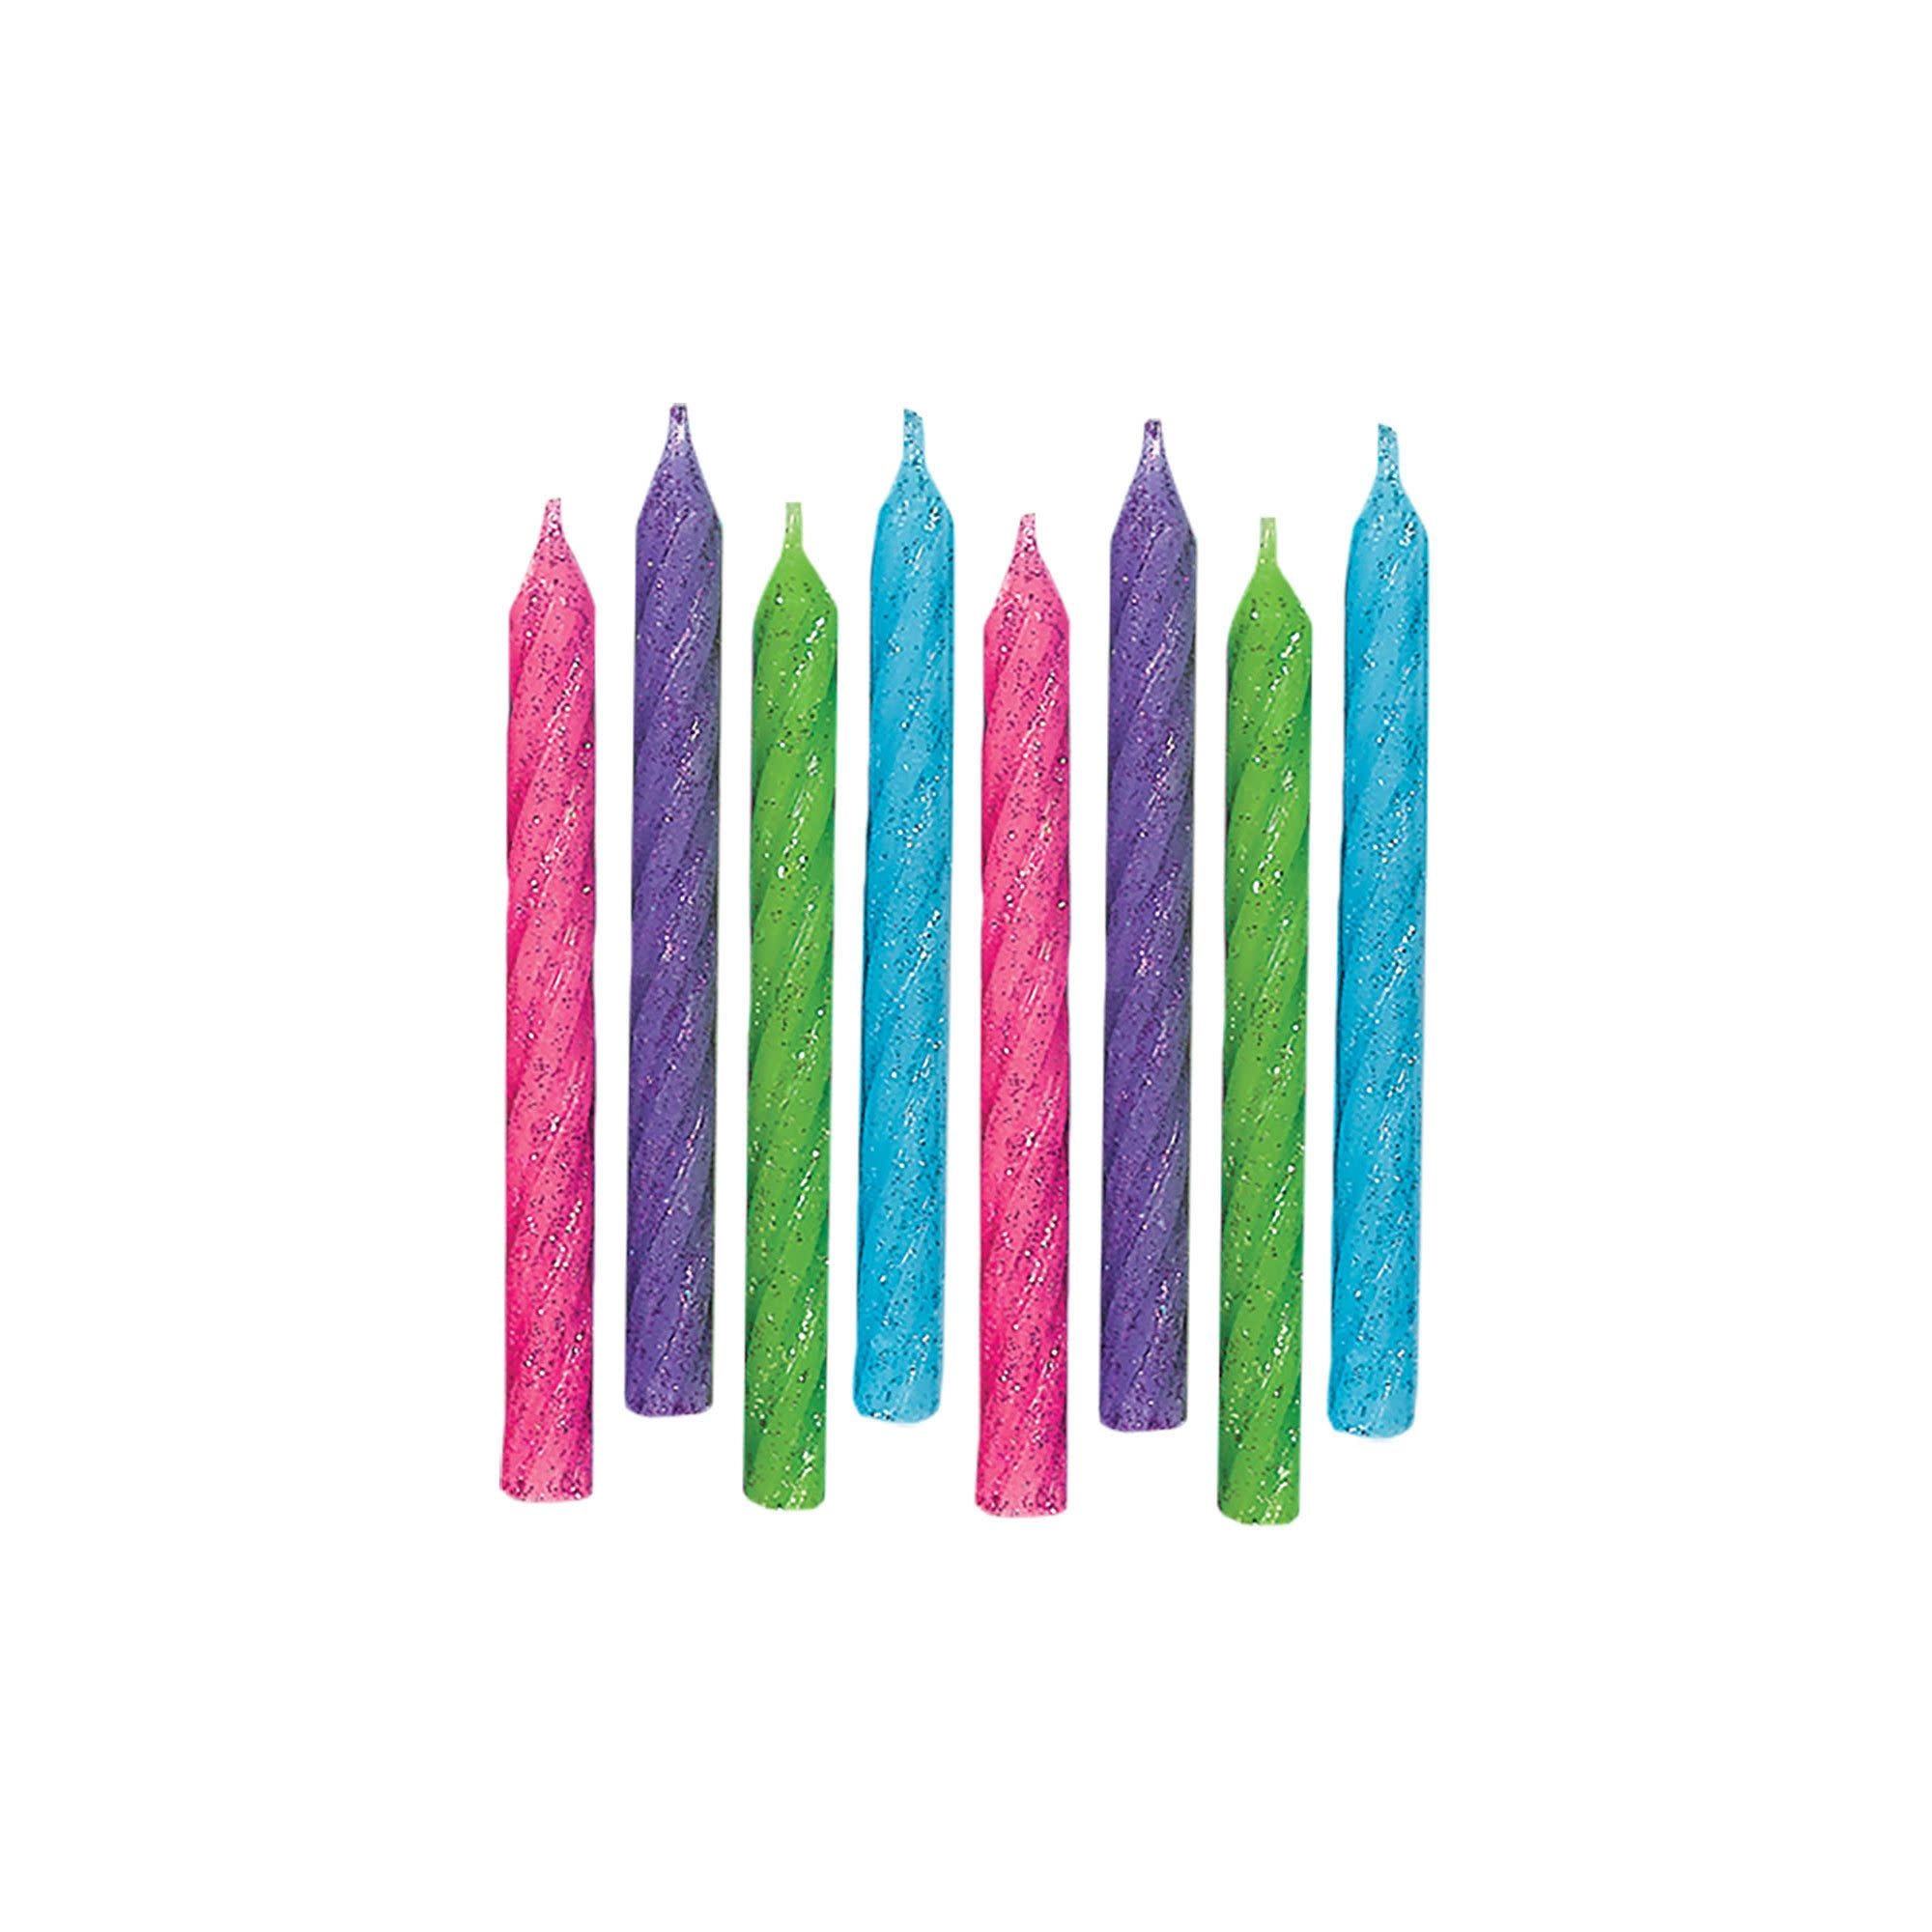 Large Glitter Spiral Candles - Brights